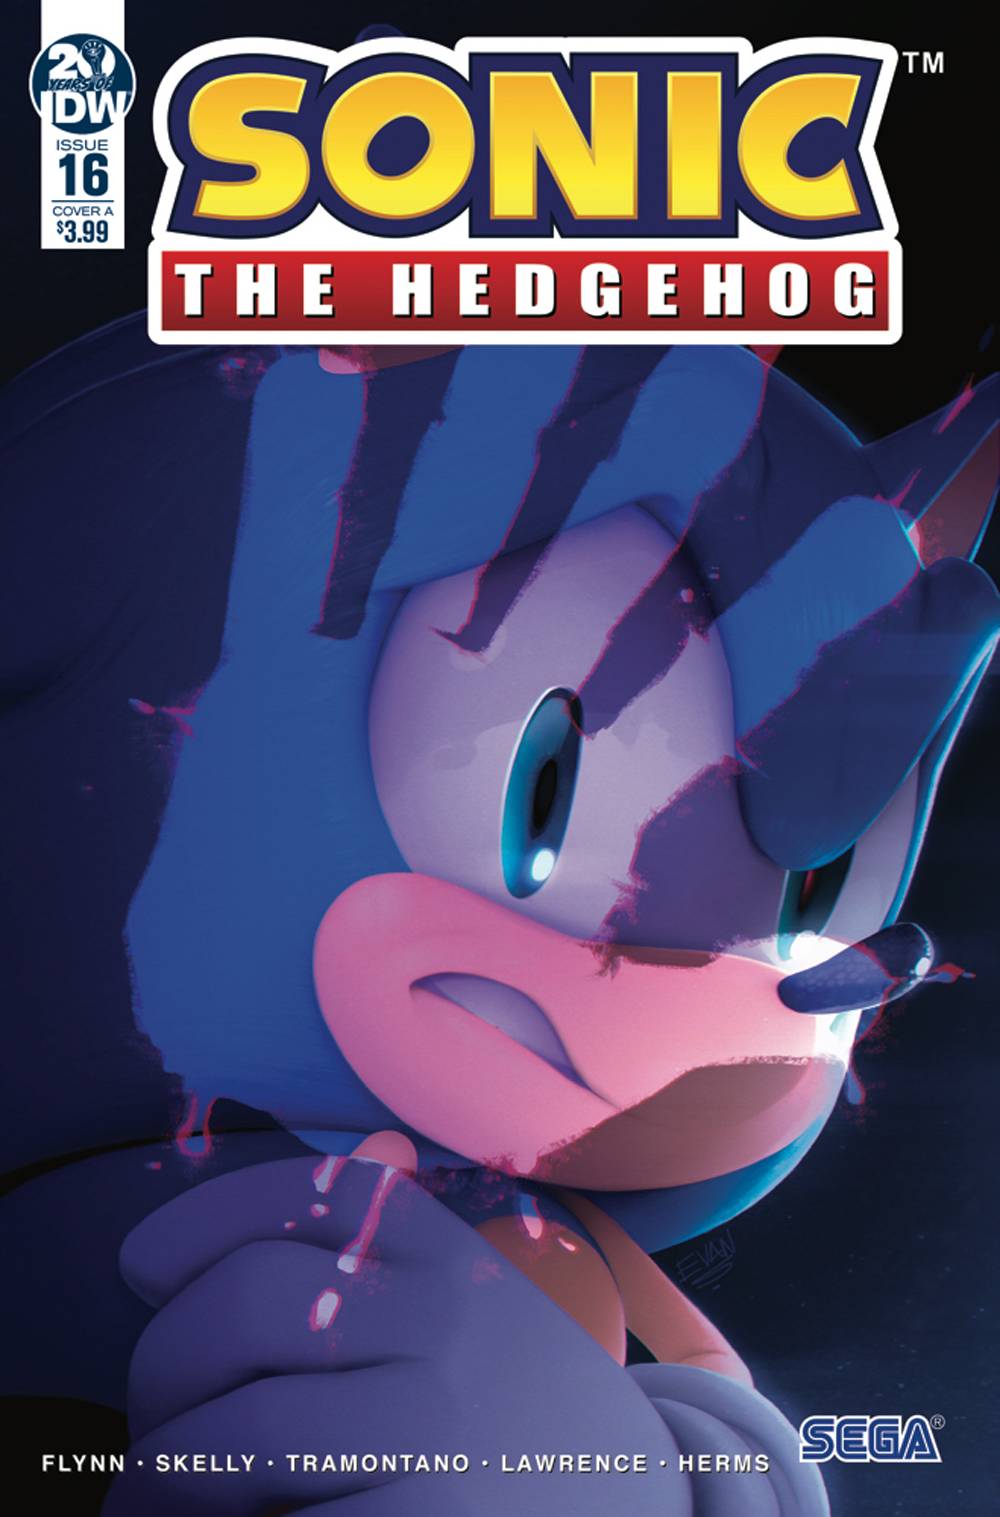 Sonic The Hedgehog #16 Cover A (Stanley) [2019]